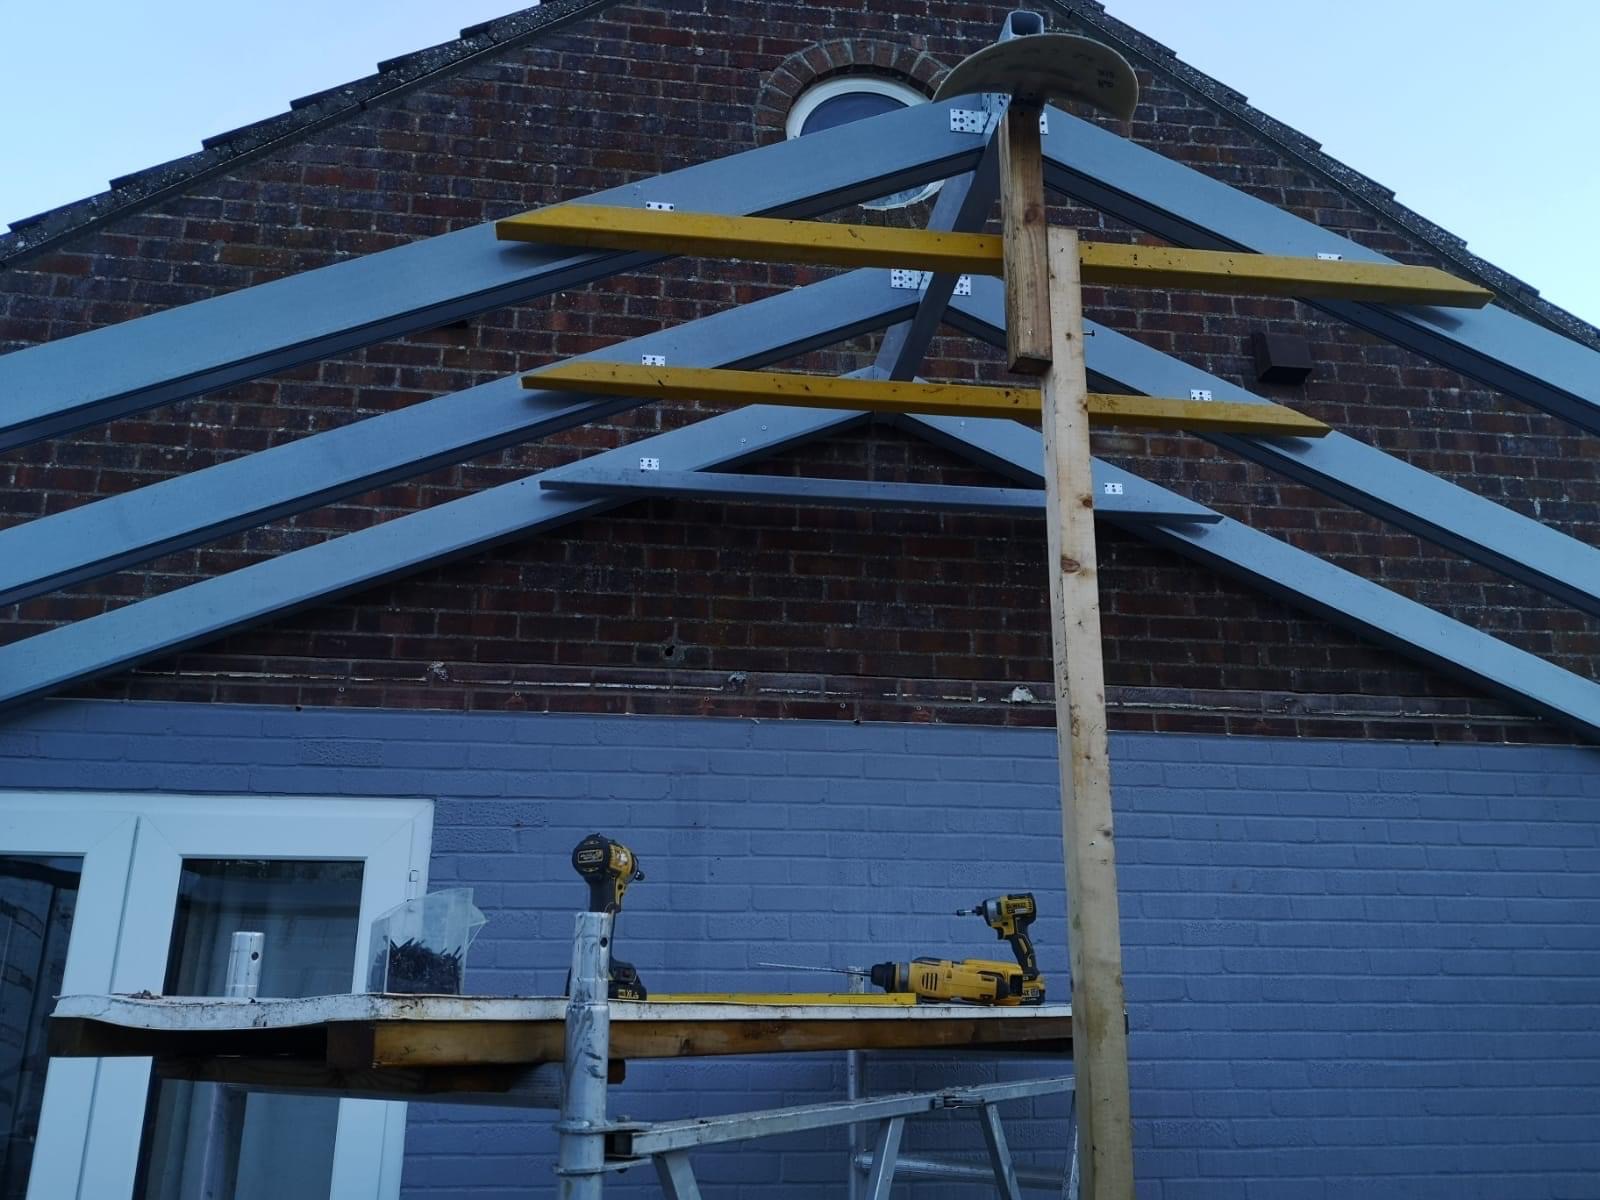 Steel beams for conservatory roof with tools